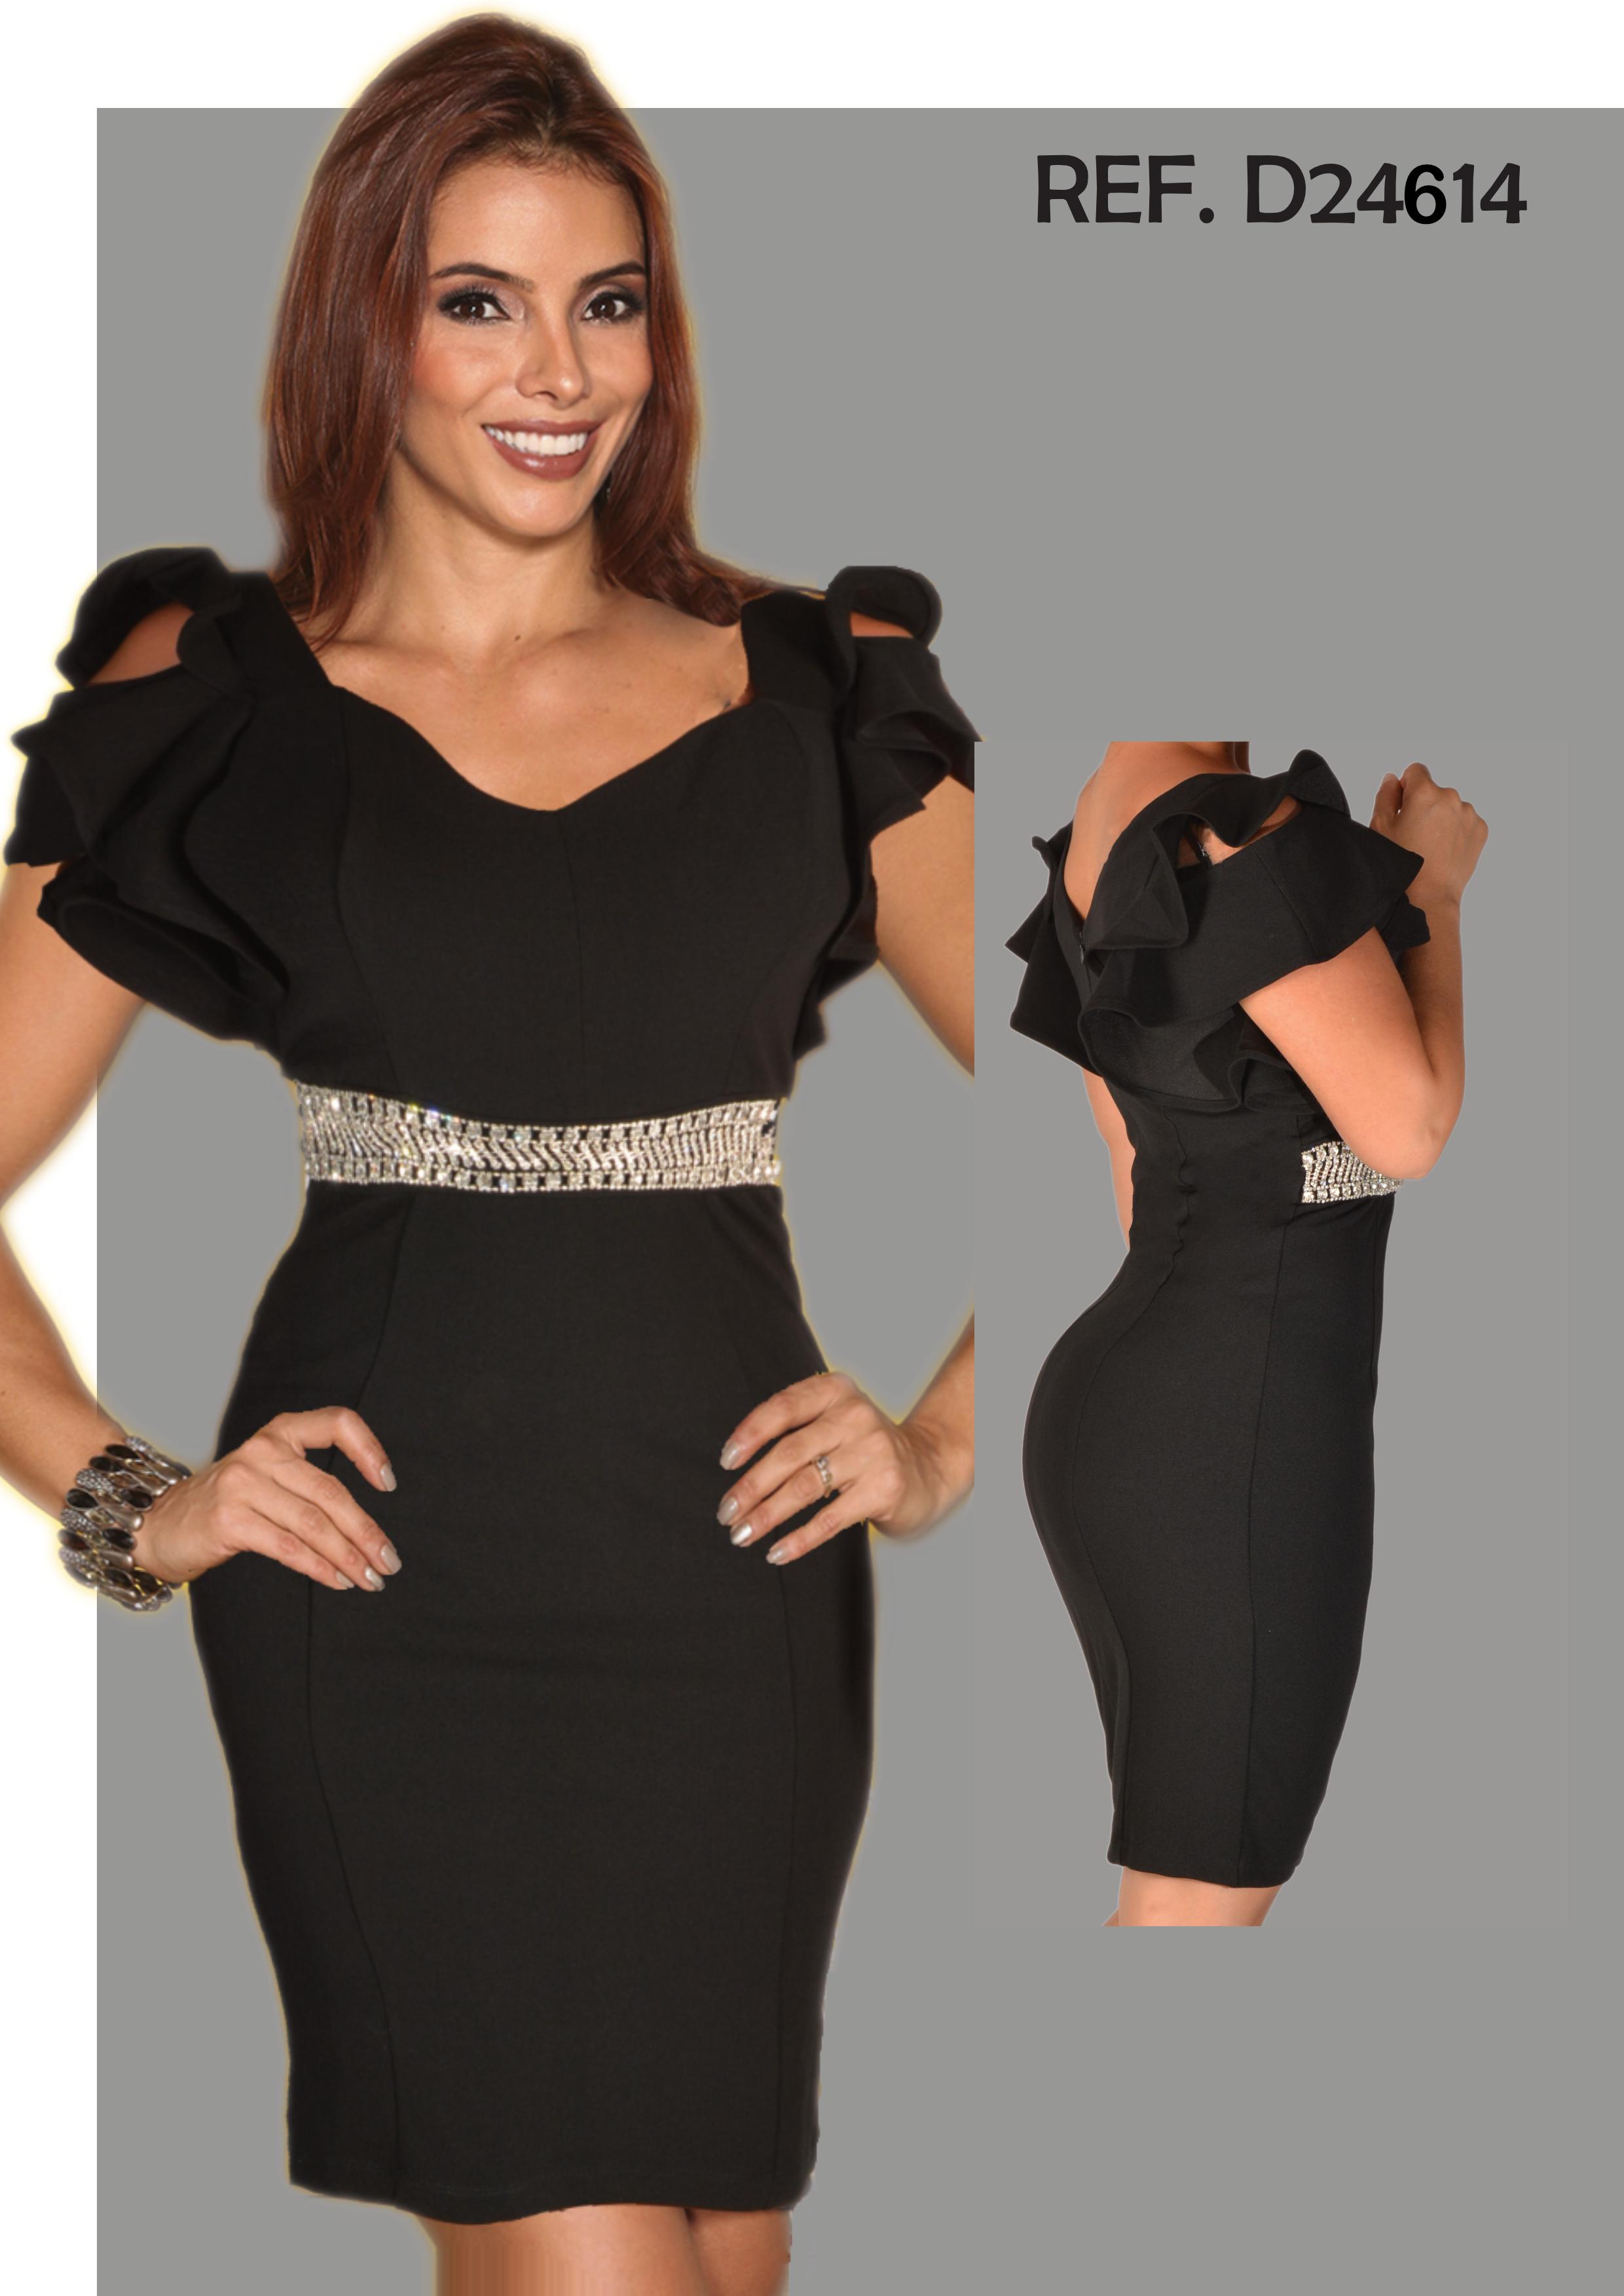 Sensational American Lady Dress Black Color with Belt Design in Classic Long Rhinestones at the Knee